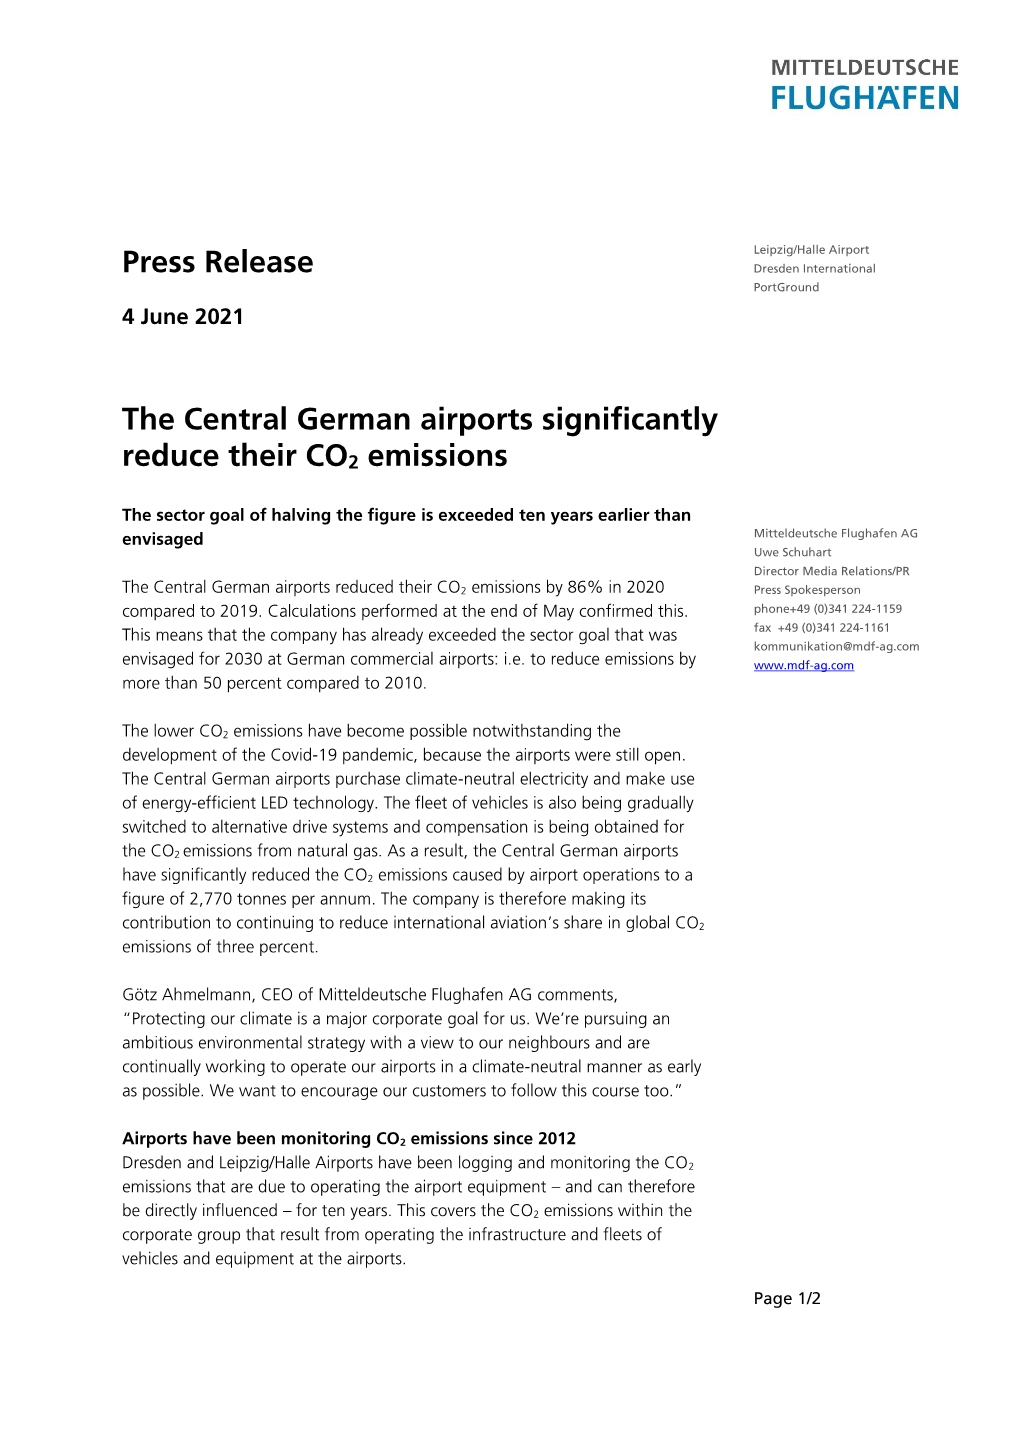 Press Release the Central German Airports Significantly Reduce Their